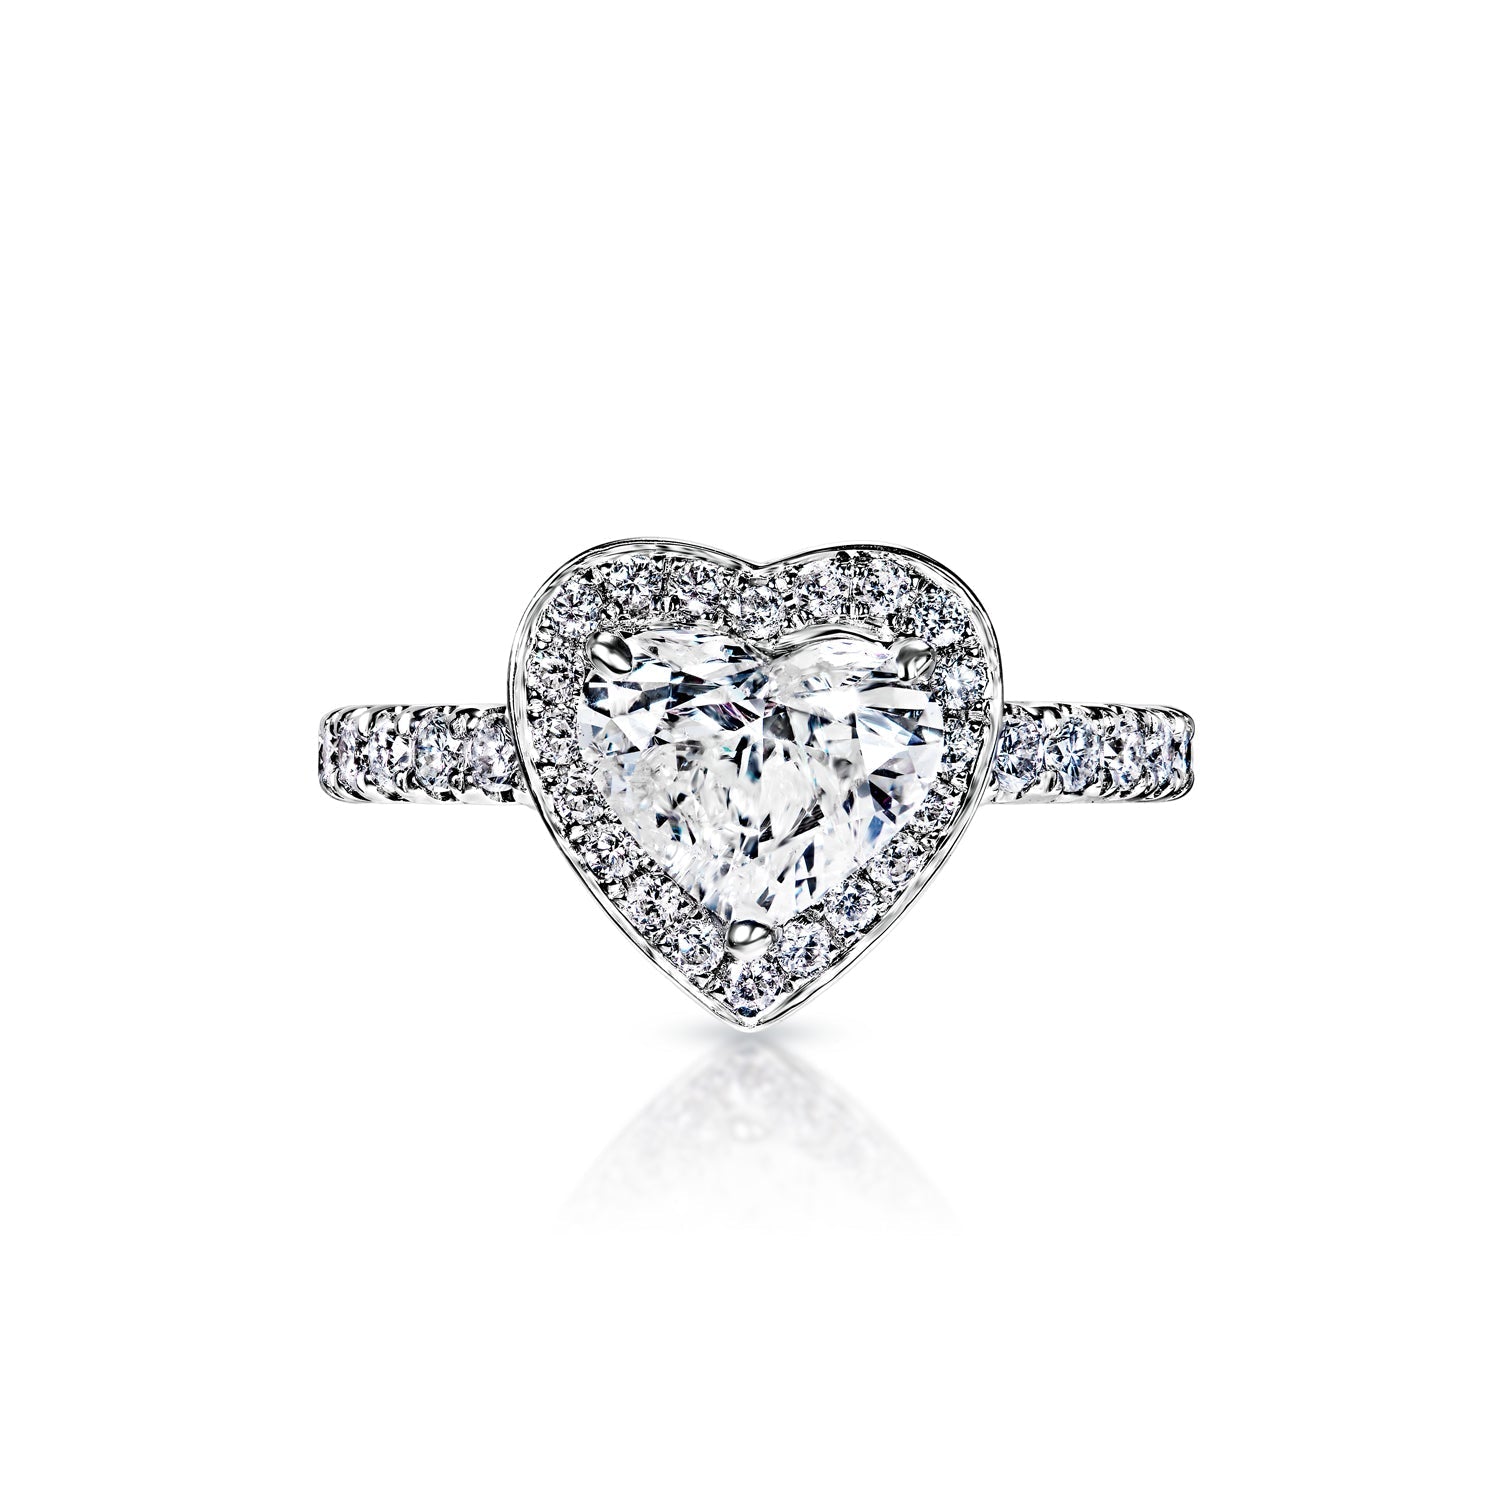 Kayla 2 Carat H SI3 Heart Shape Diamond Engagement Ring in 18k White Gold Front View